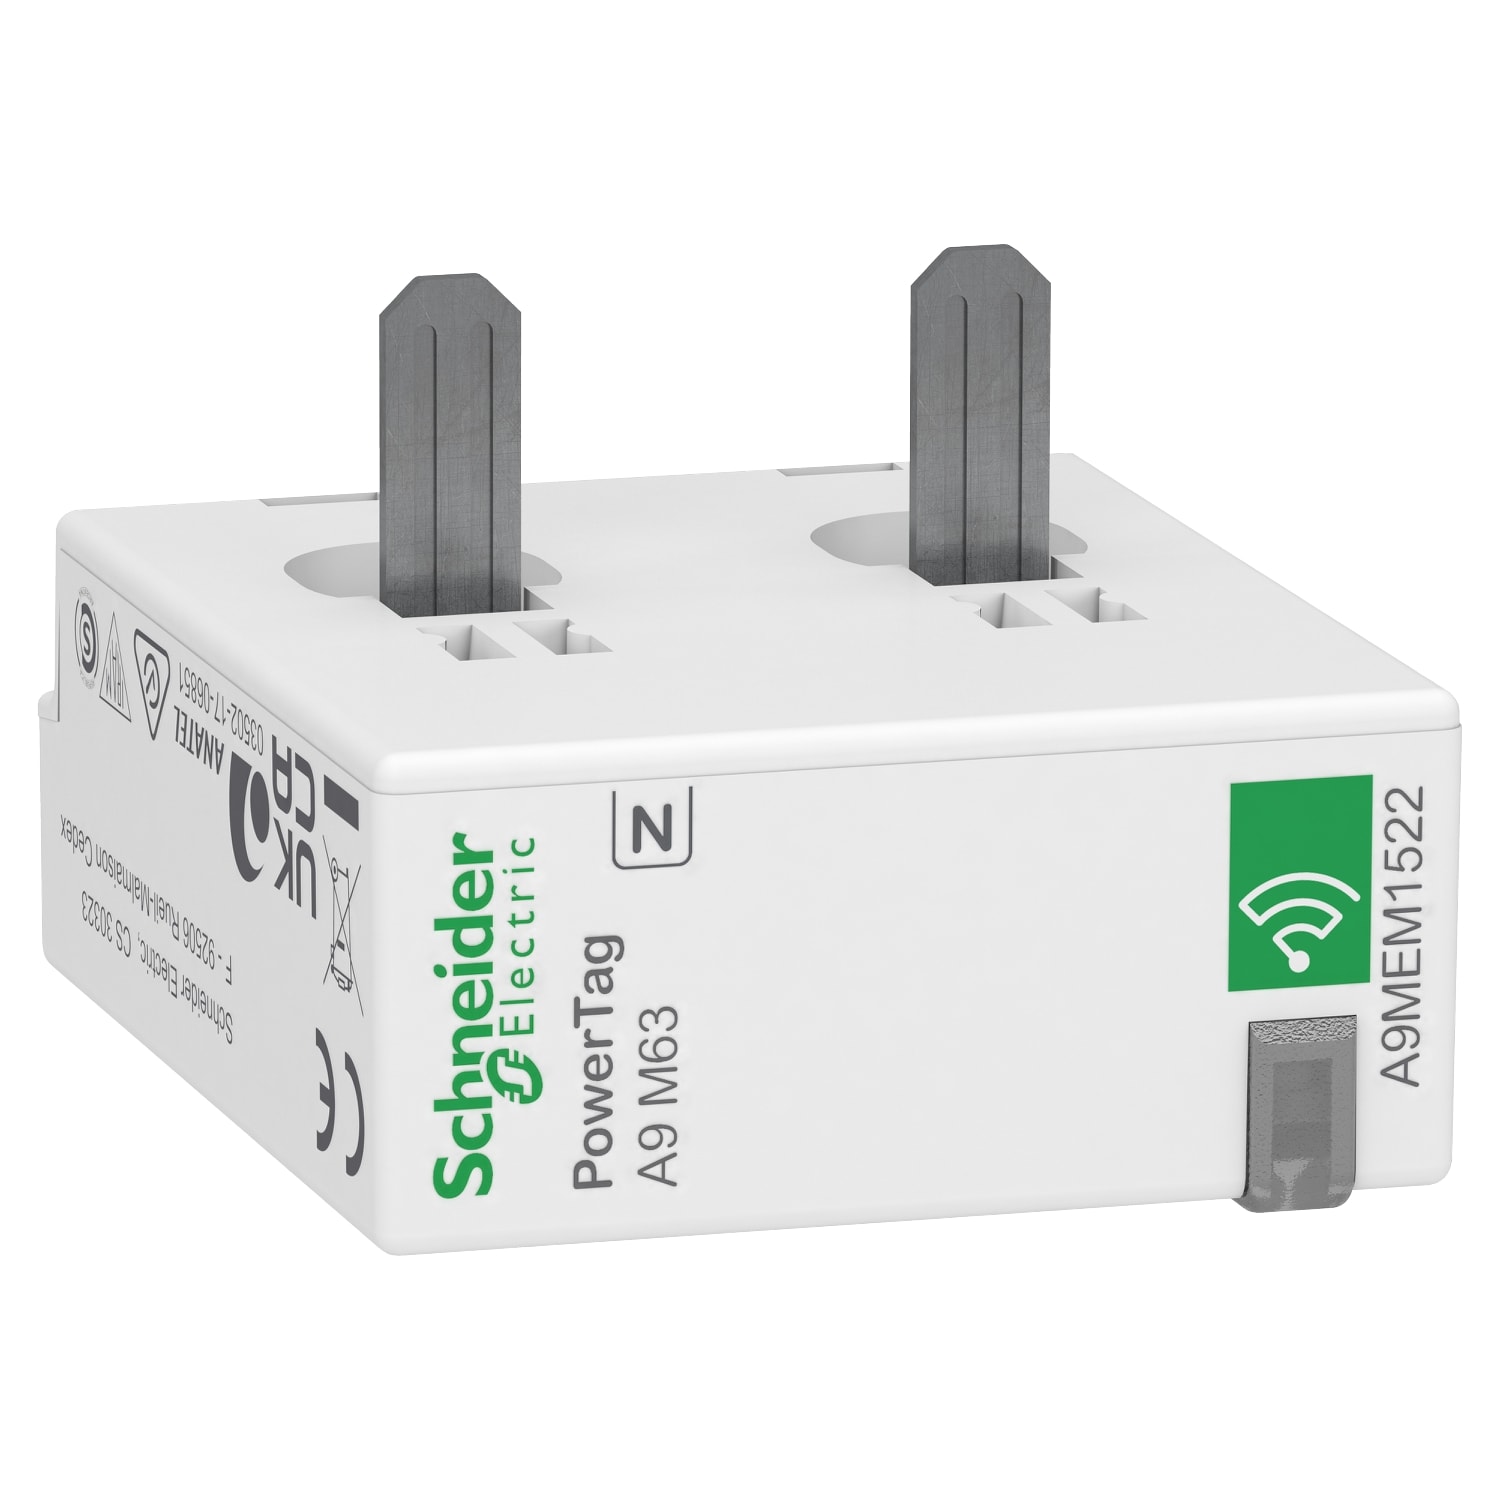 Schneider Electric - PowerTag - Capteur de mesure radiofrequence - iC60 iID DT60 - 1P+N 63A - aval